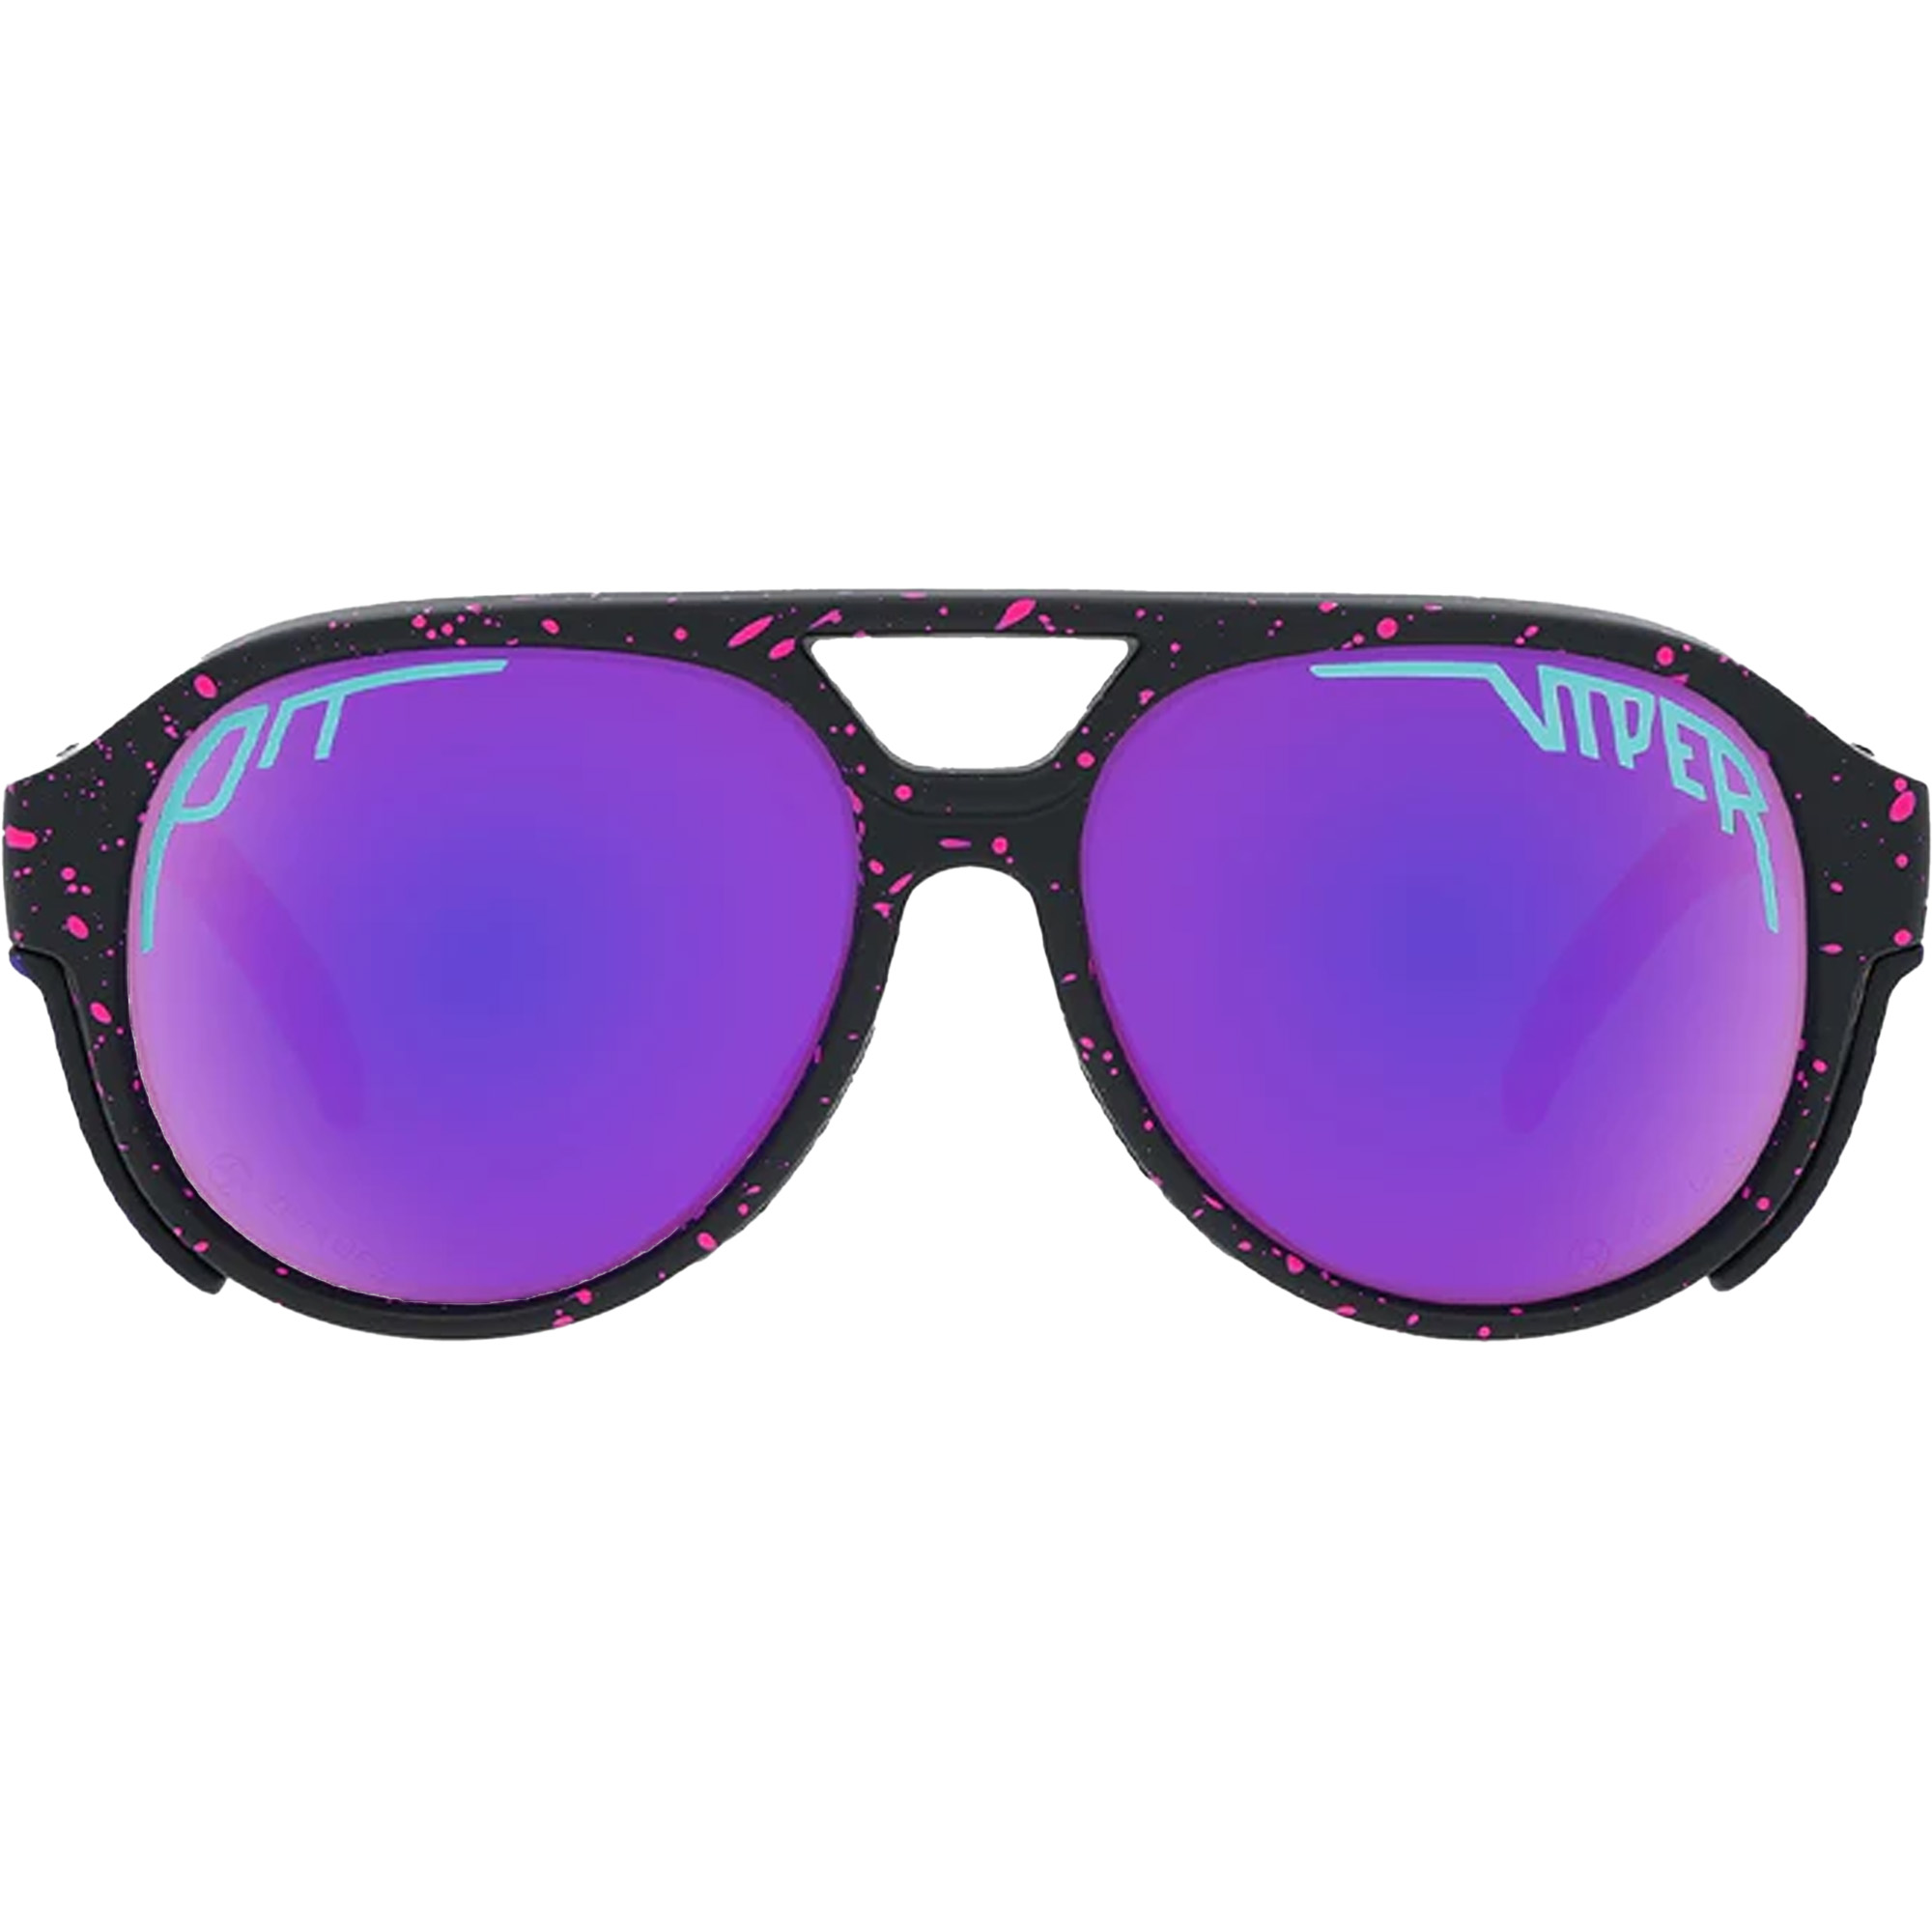 Pit Viper The Exciters Dual Lens Polarized Sunglasses